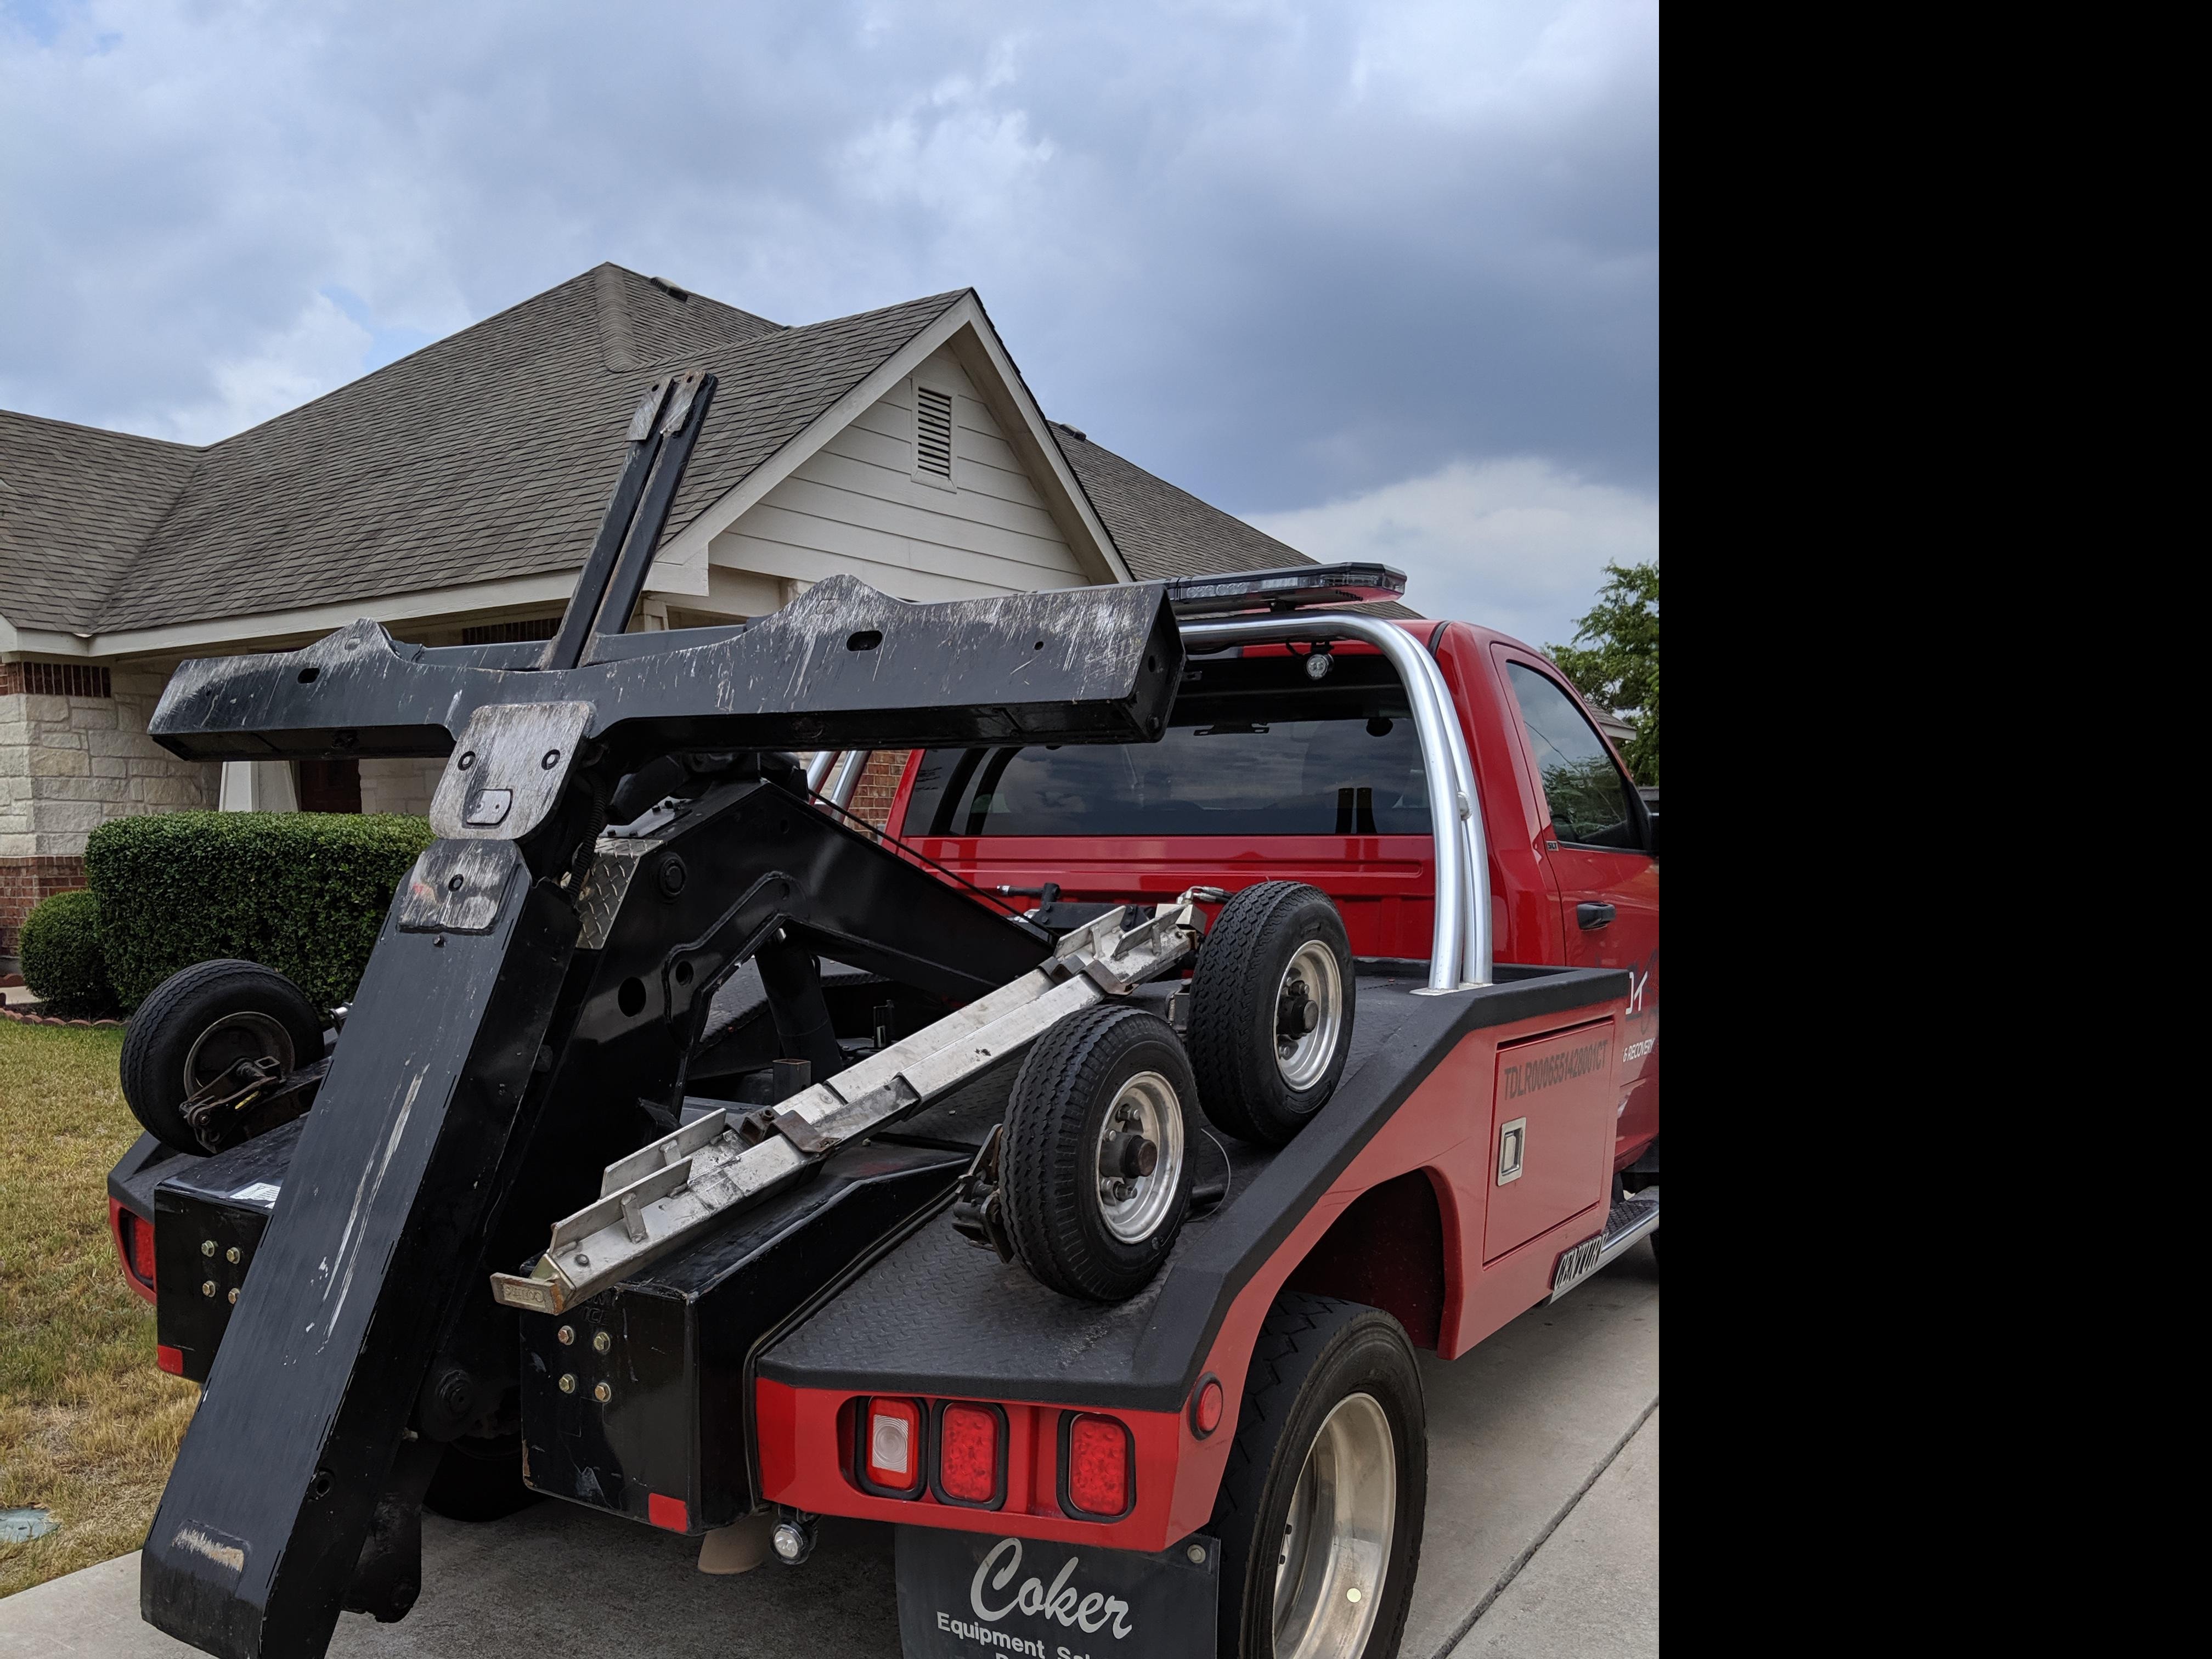 All Over Texas Towing & Recovery Photo